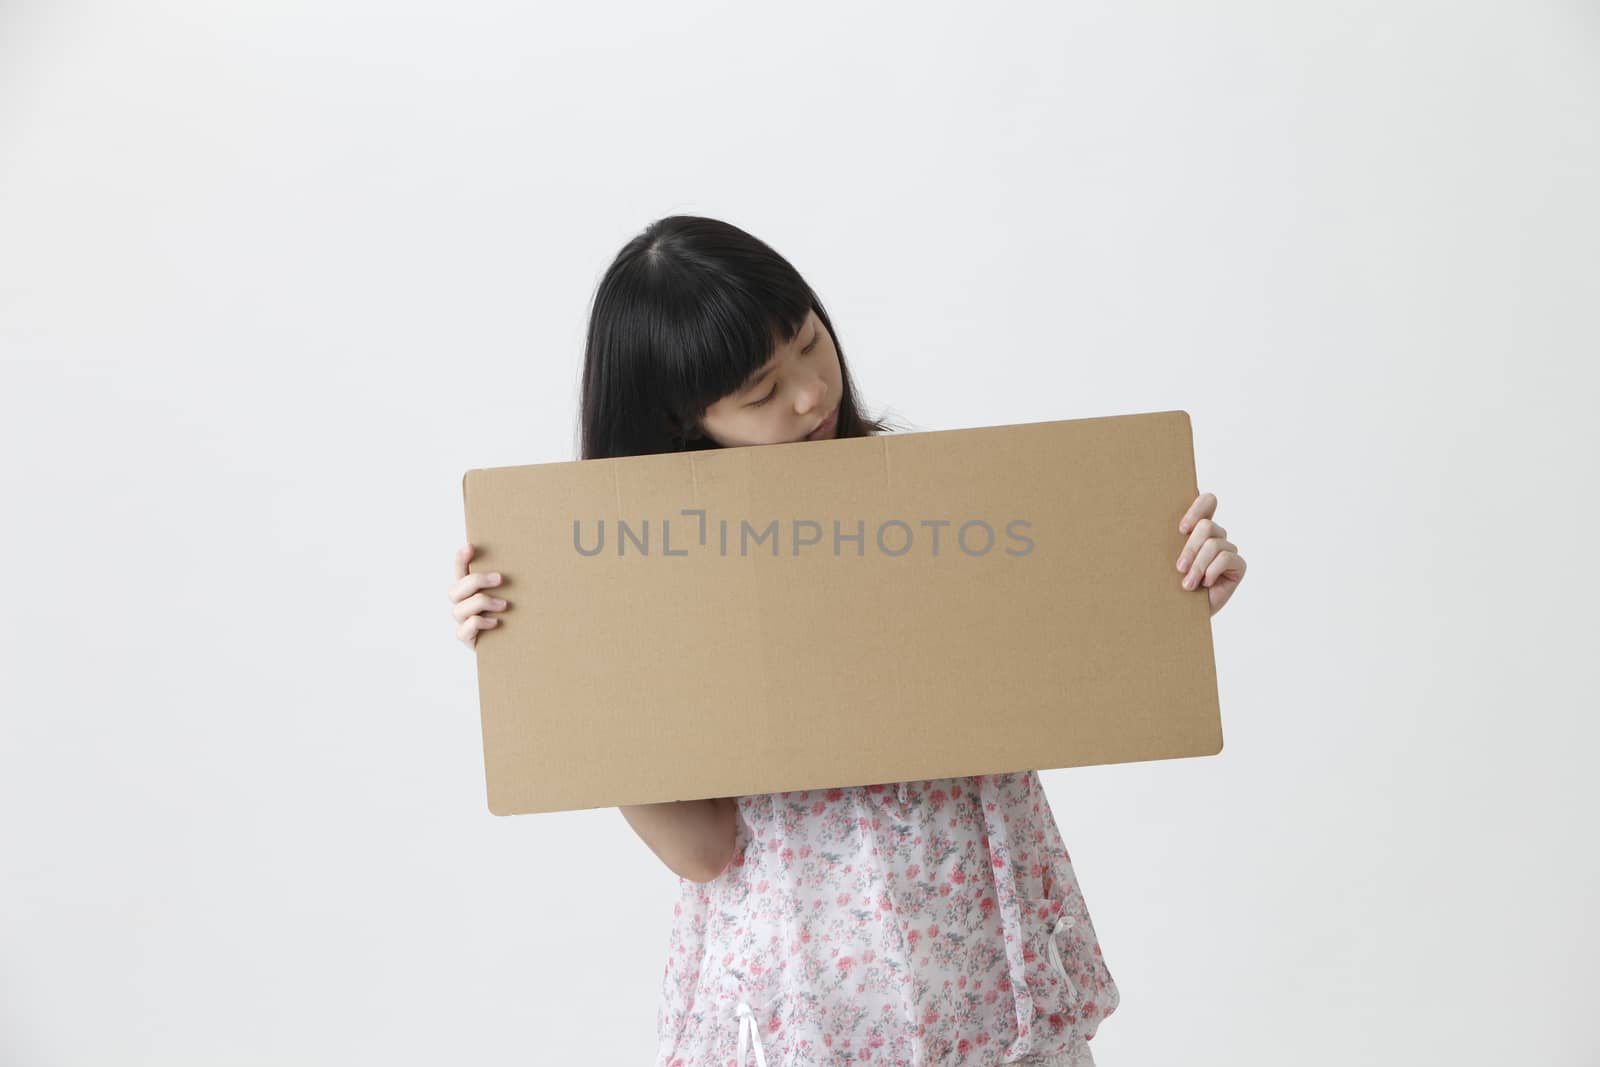 chinese girl holding and looking at brown message board